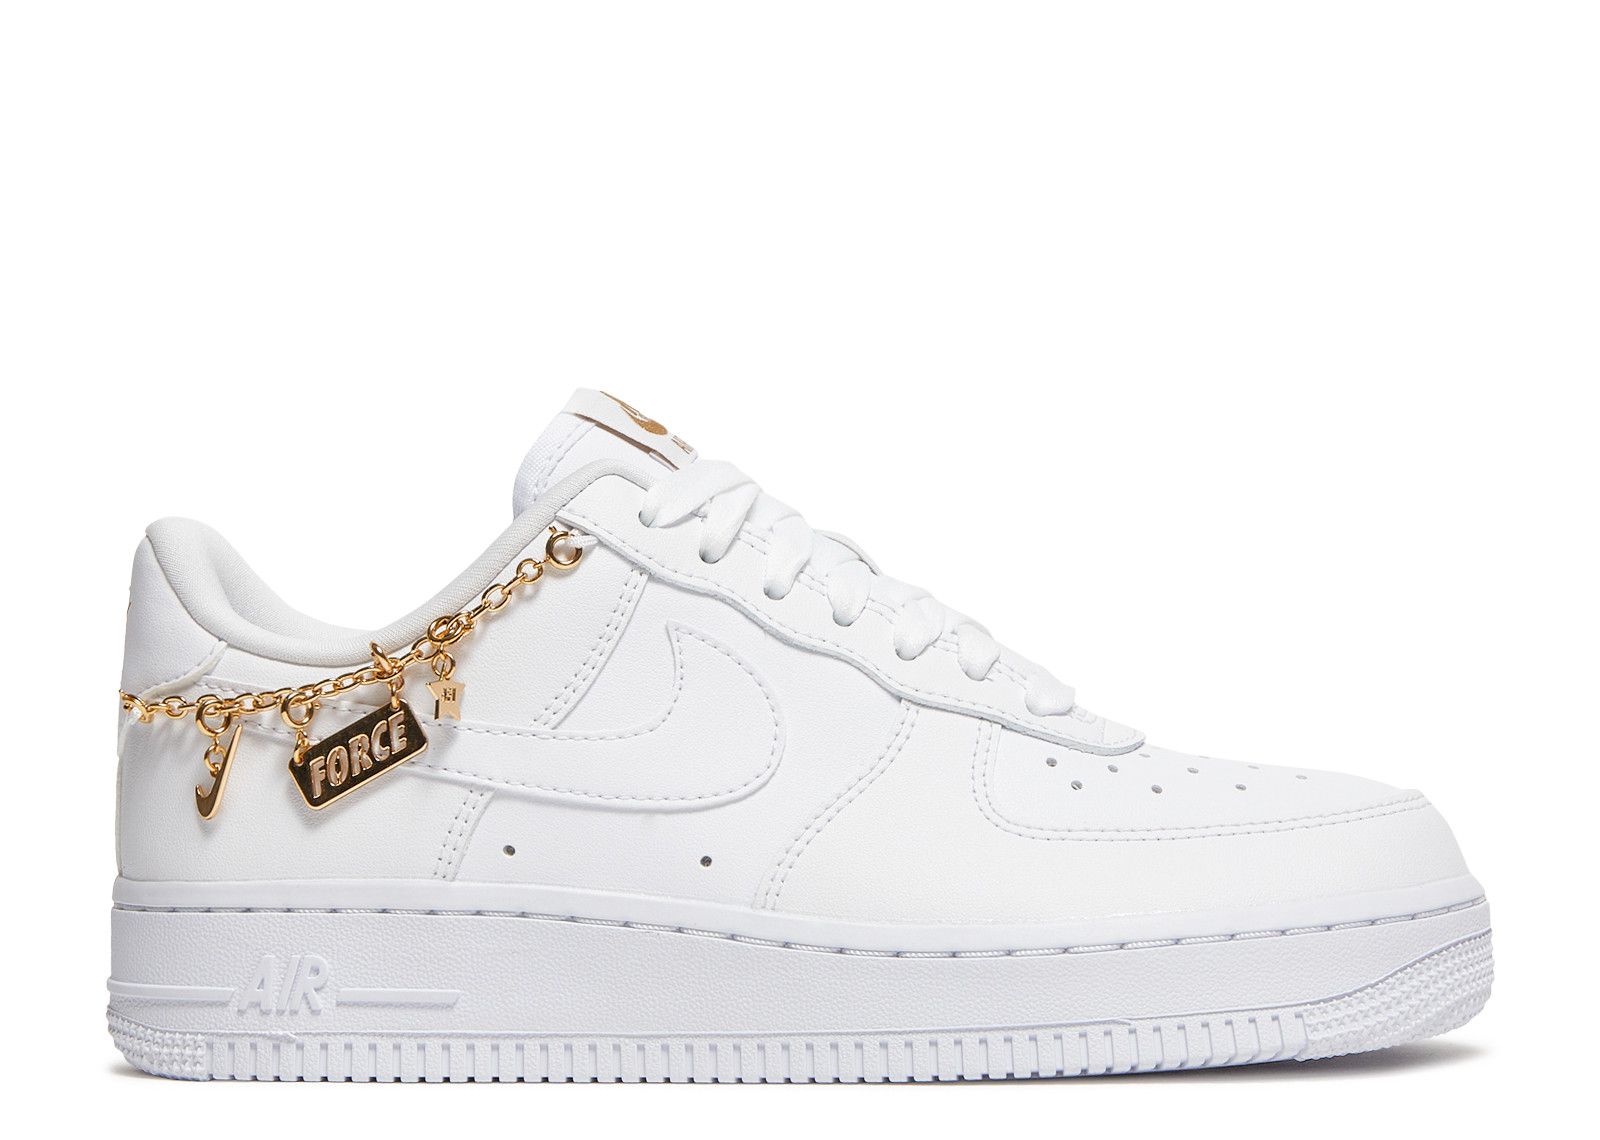 Wmns Air Force 1 '07 LX 'Lucky Charms' - Nike - DD1525 100 - white ...